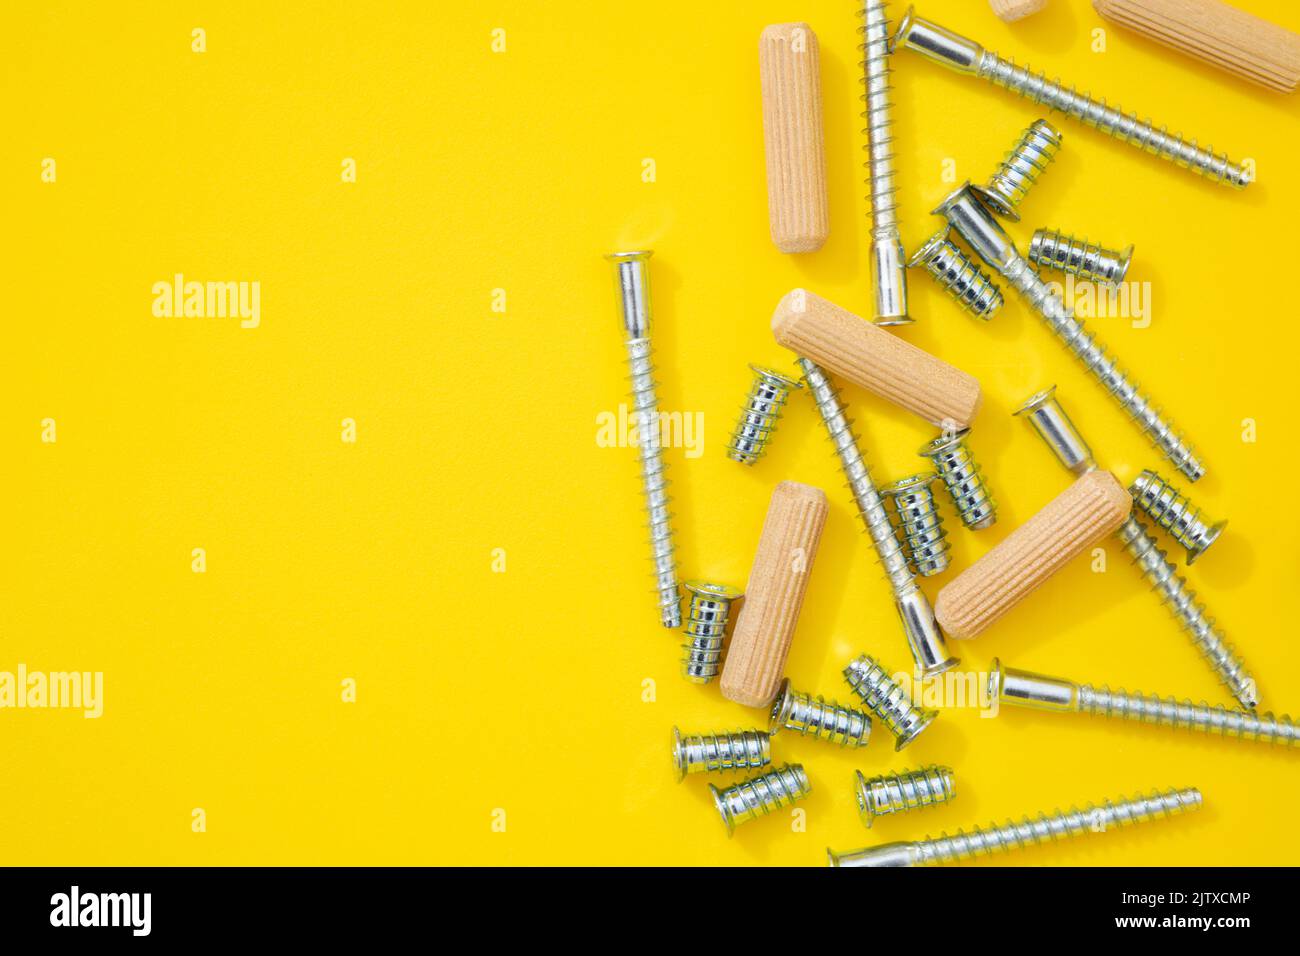 Steel screws and wooden dowels for furniture different types on yellow background. Top view Stock Photo